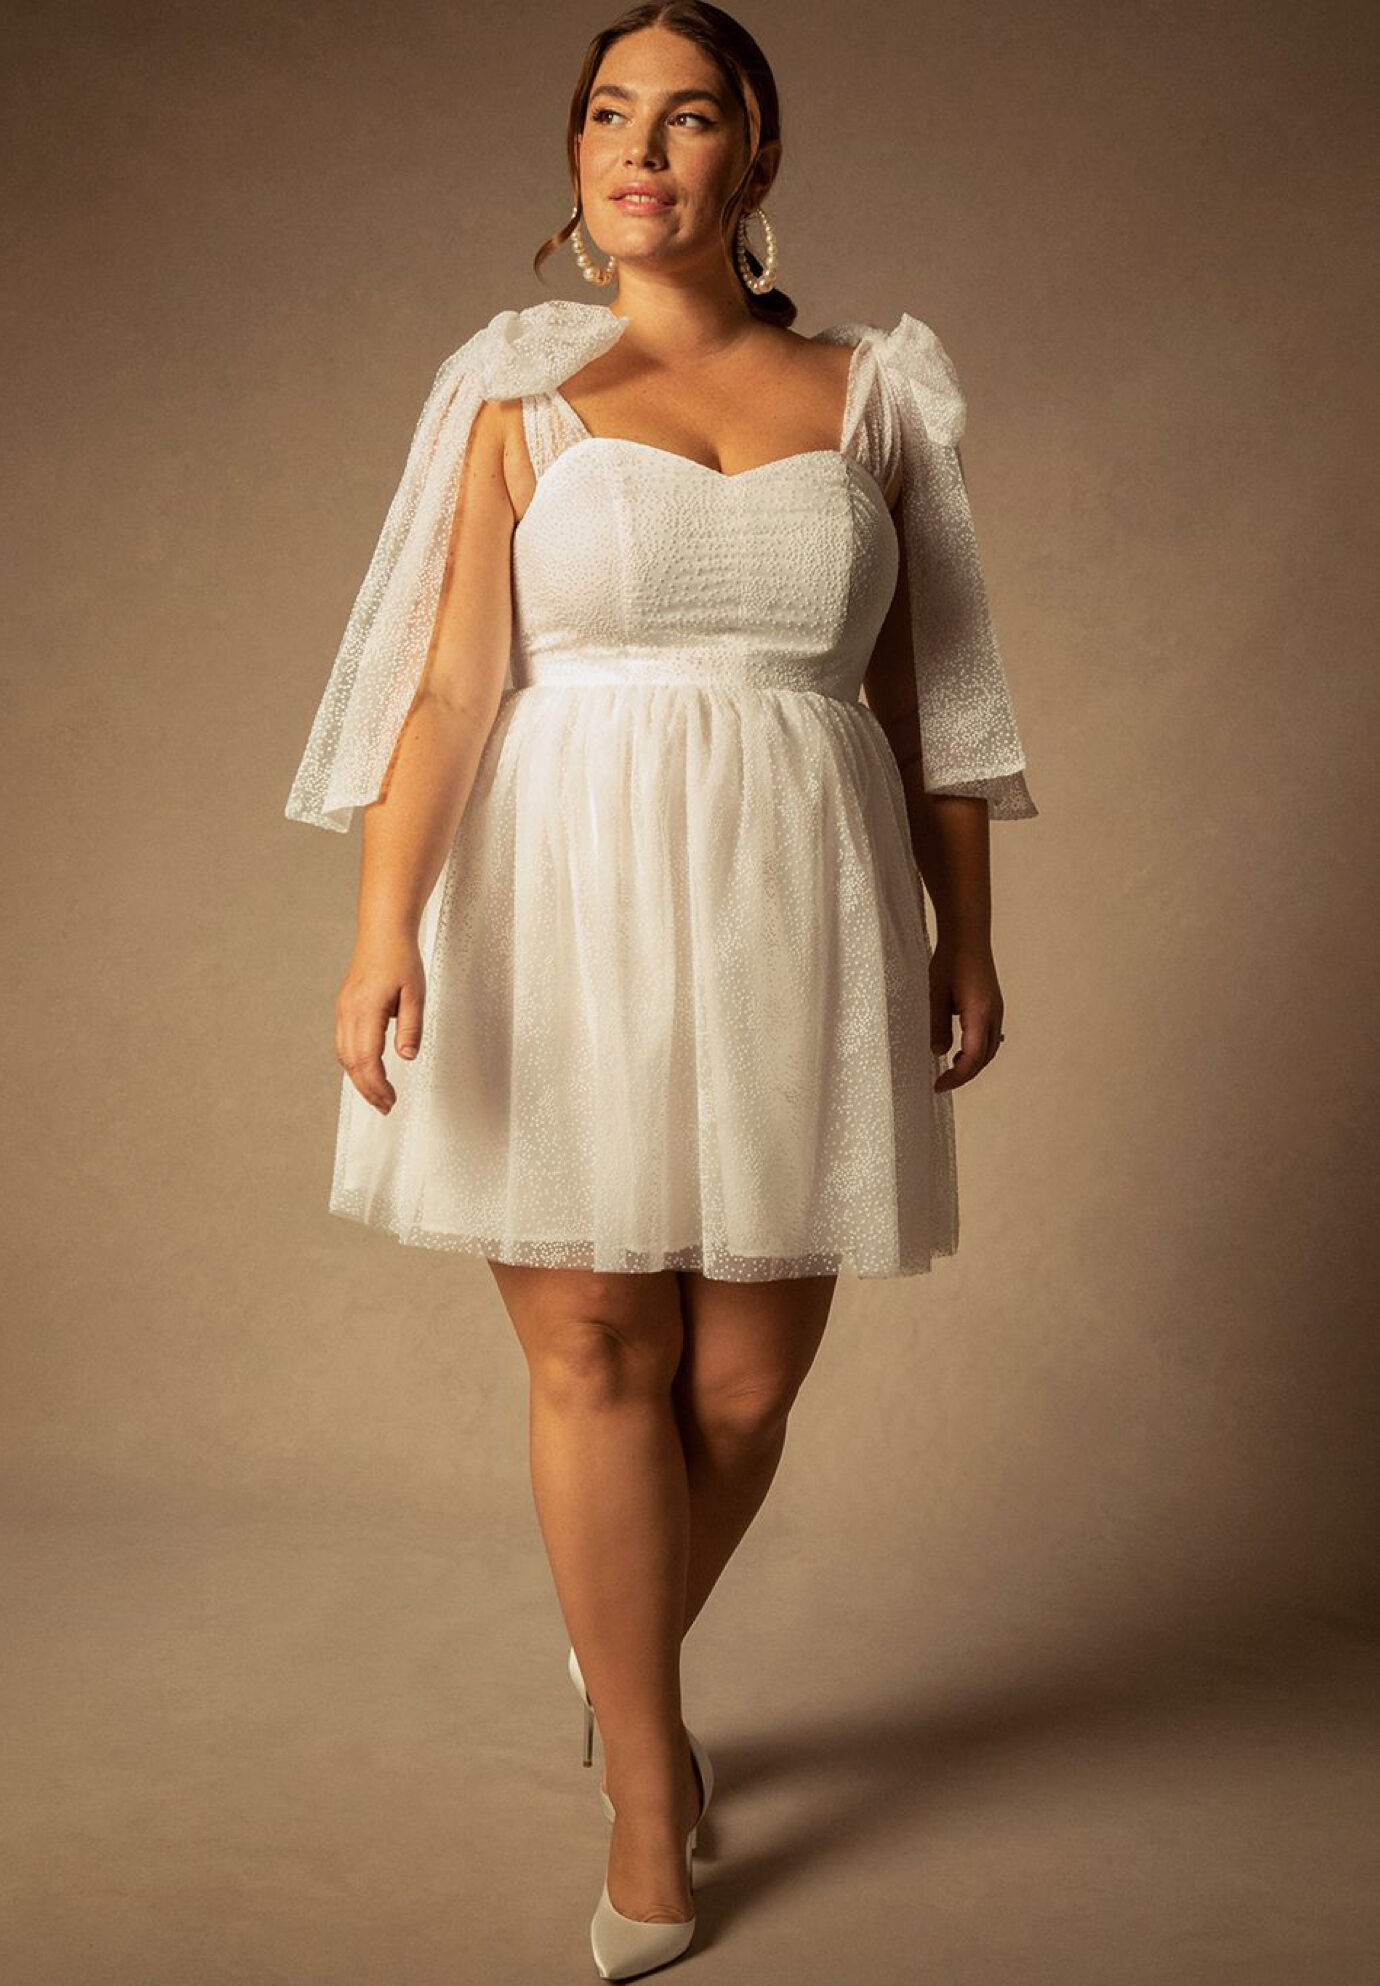 Fitted Full-Skirt Wedding Dress by Eloquii